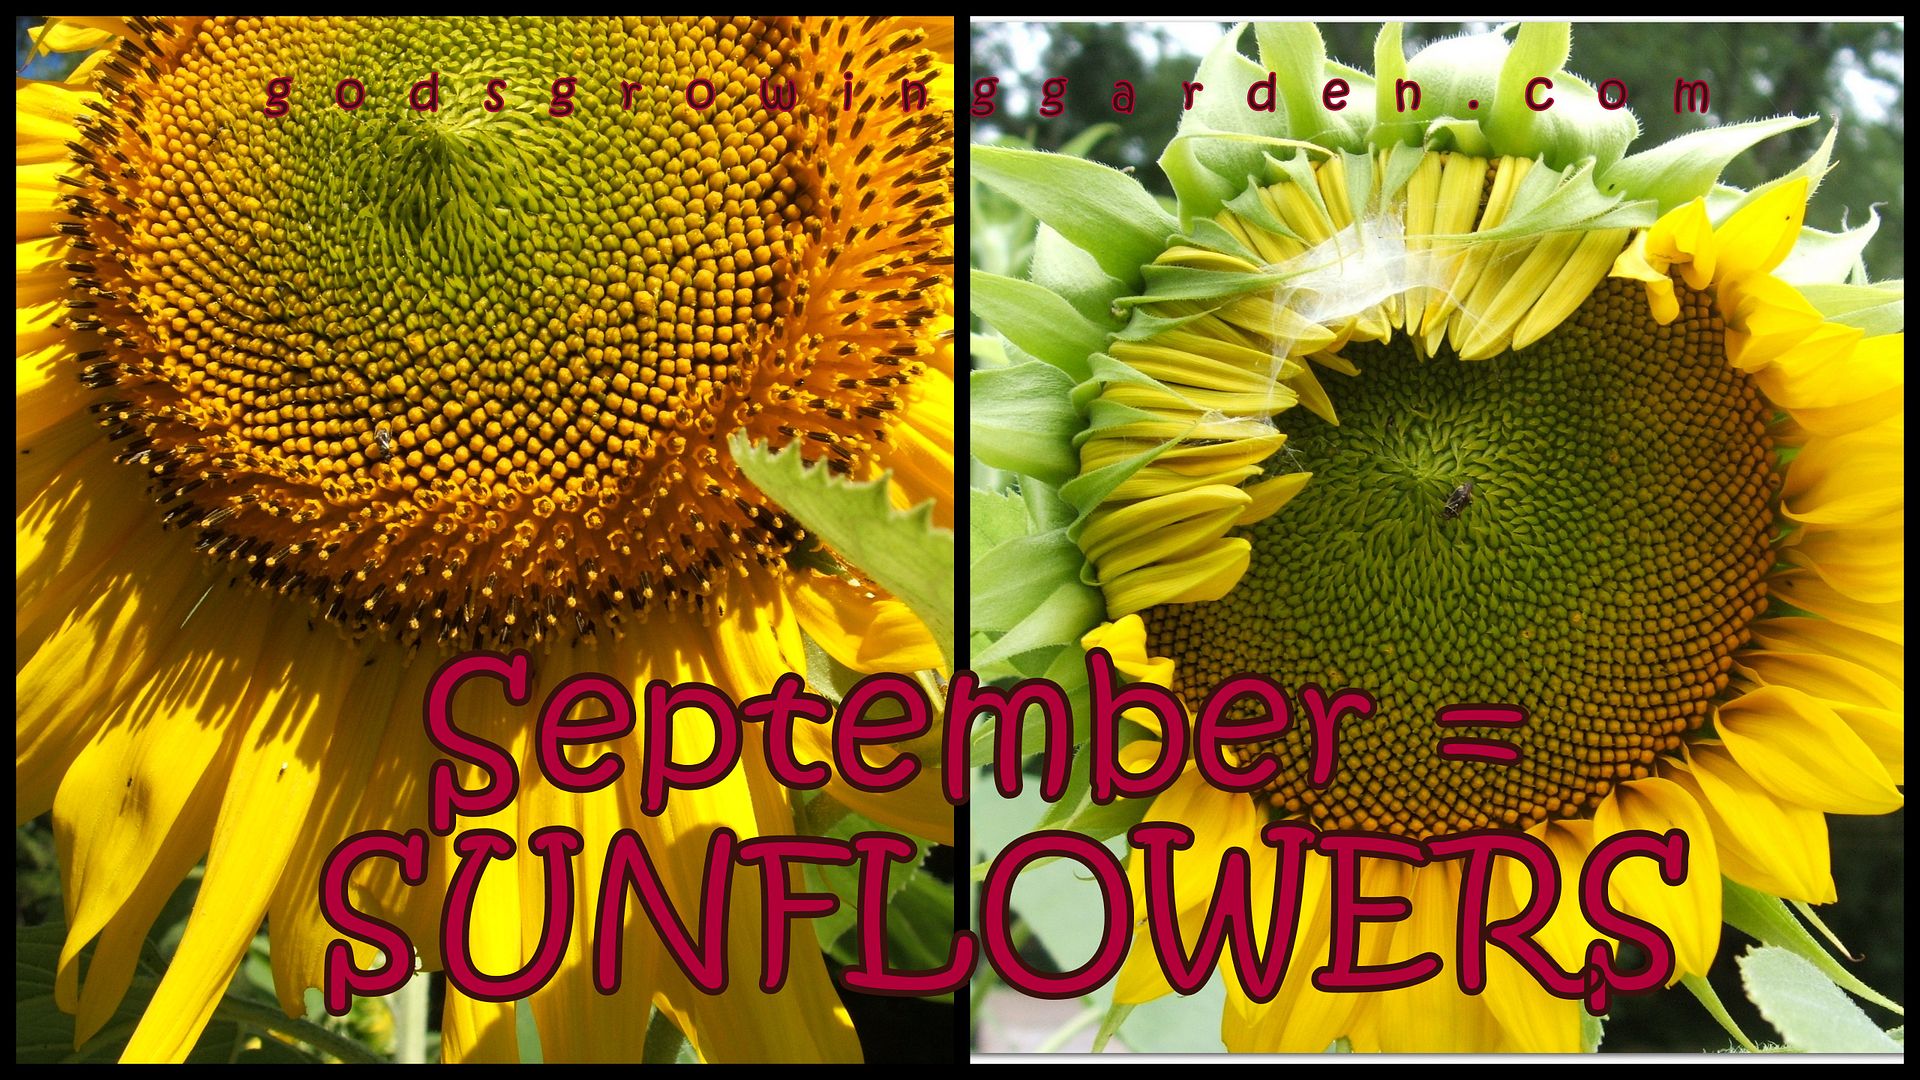 sunflowers by Angie Ouellette-Tower for godsgrowinggarden.com photo 2013-09-03_zps0eee164f.jpg